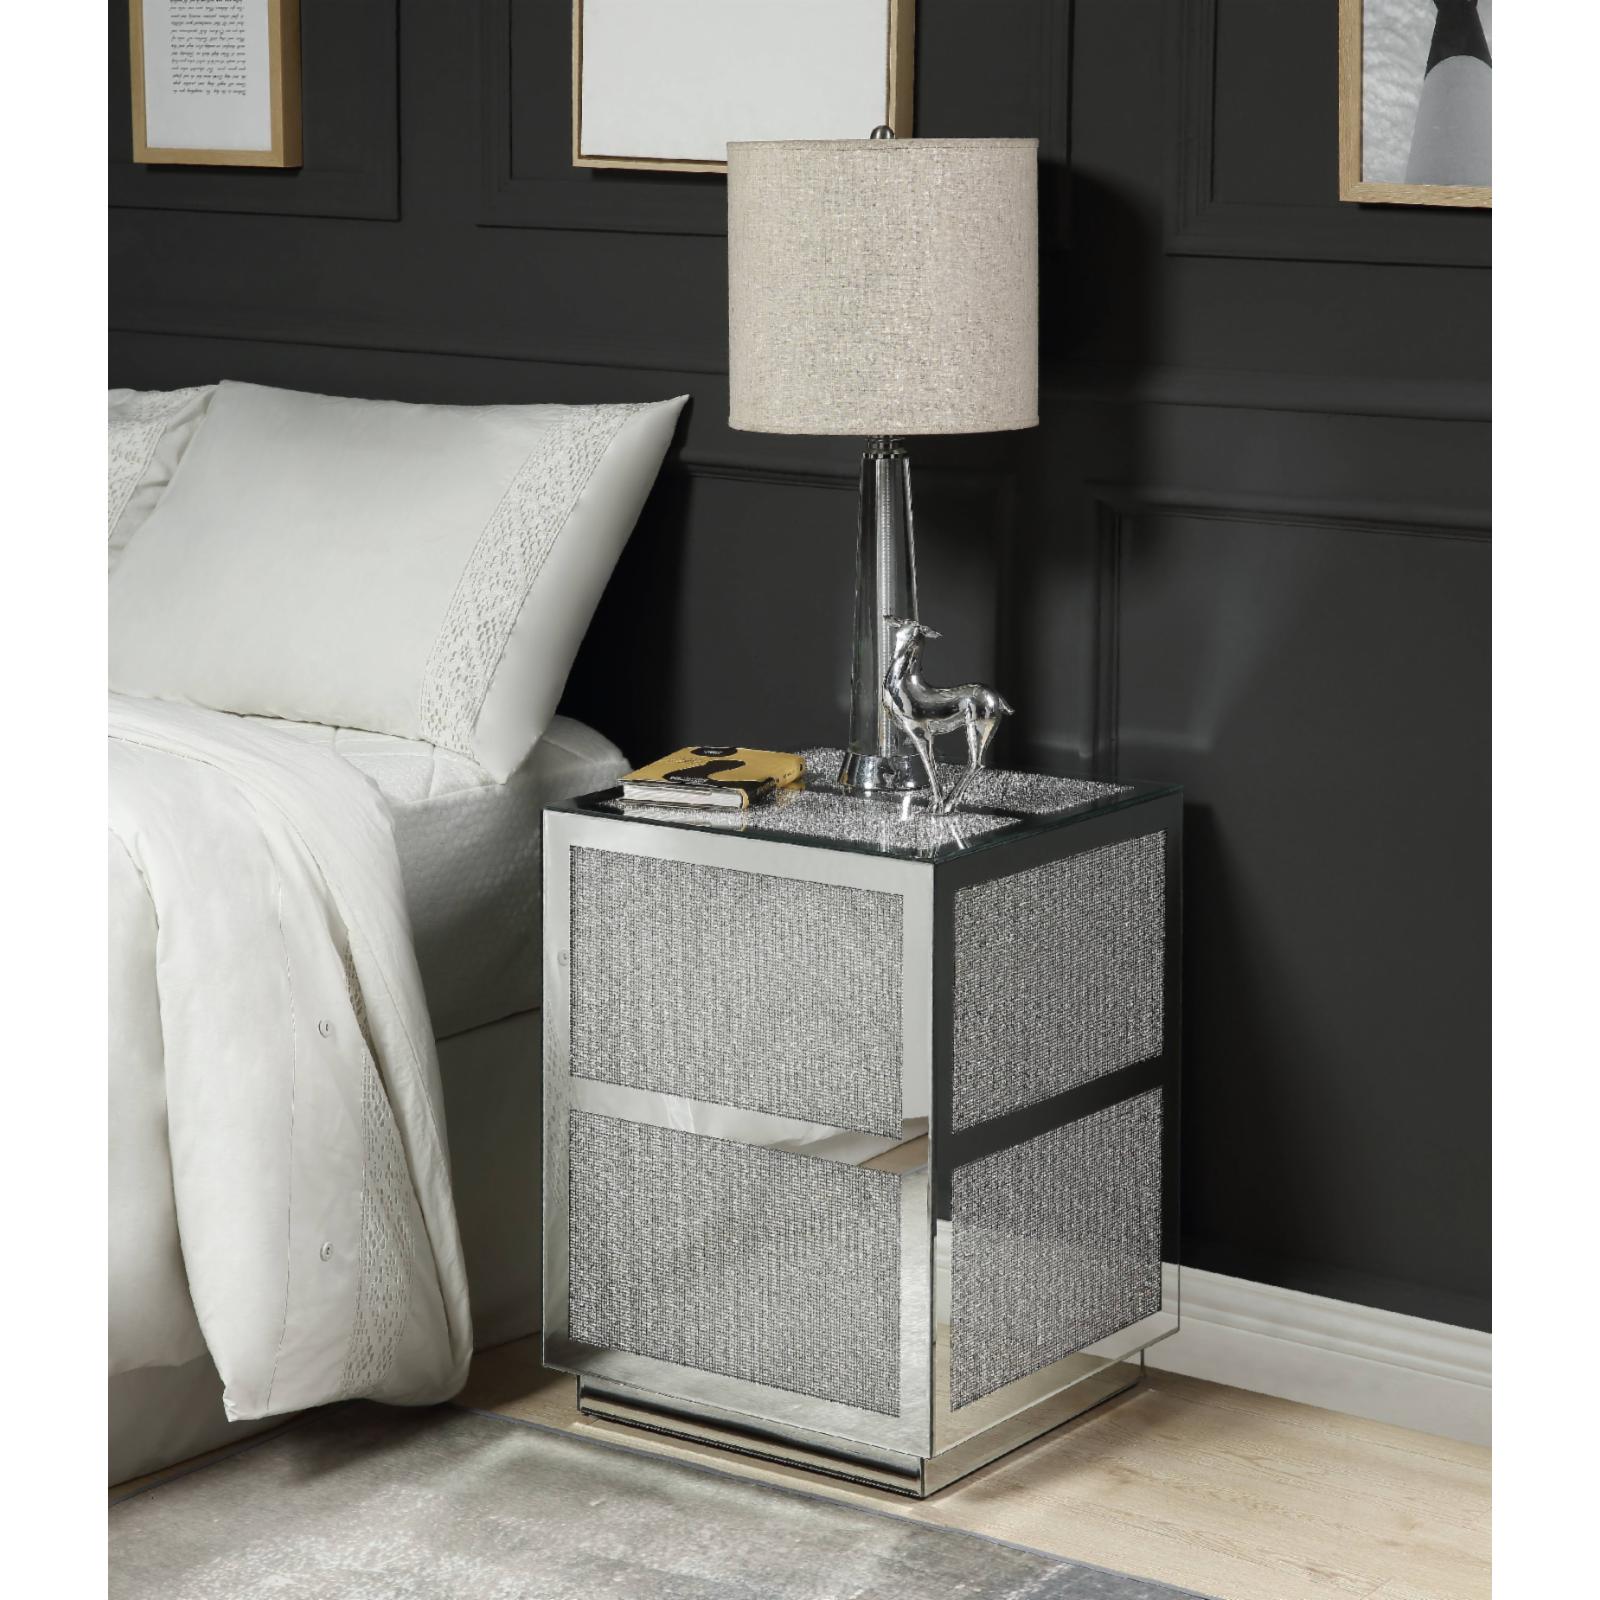 ACME Lavina End Table in Mirrored and Faux Diamonds - image 4 of 4